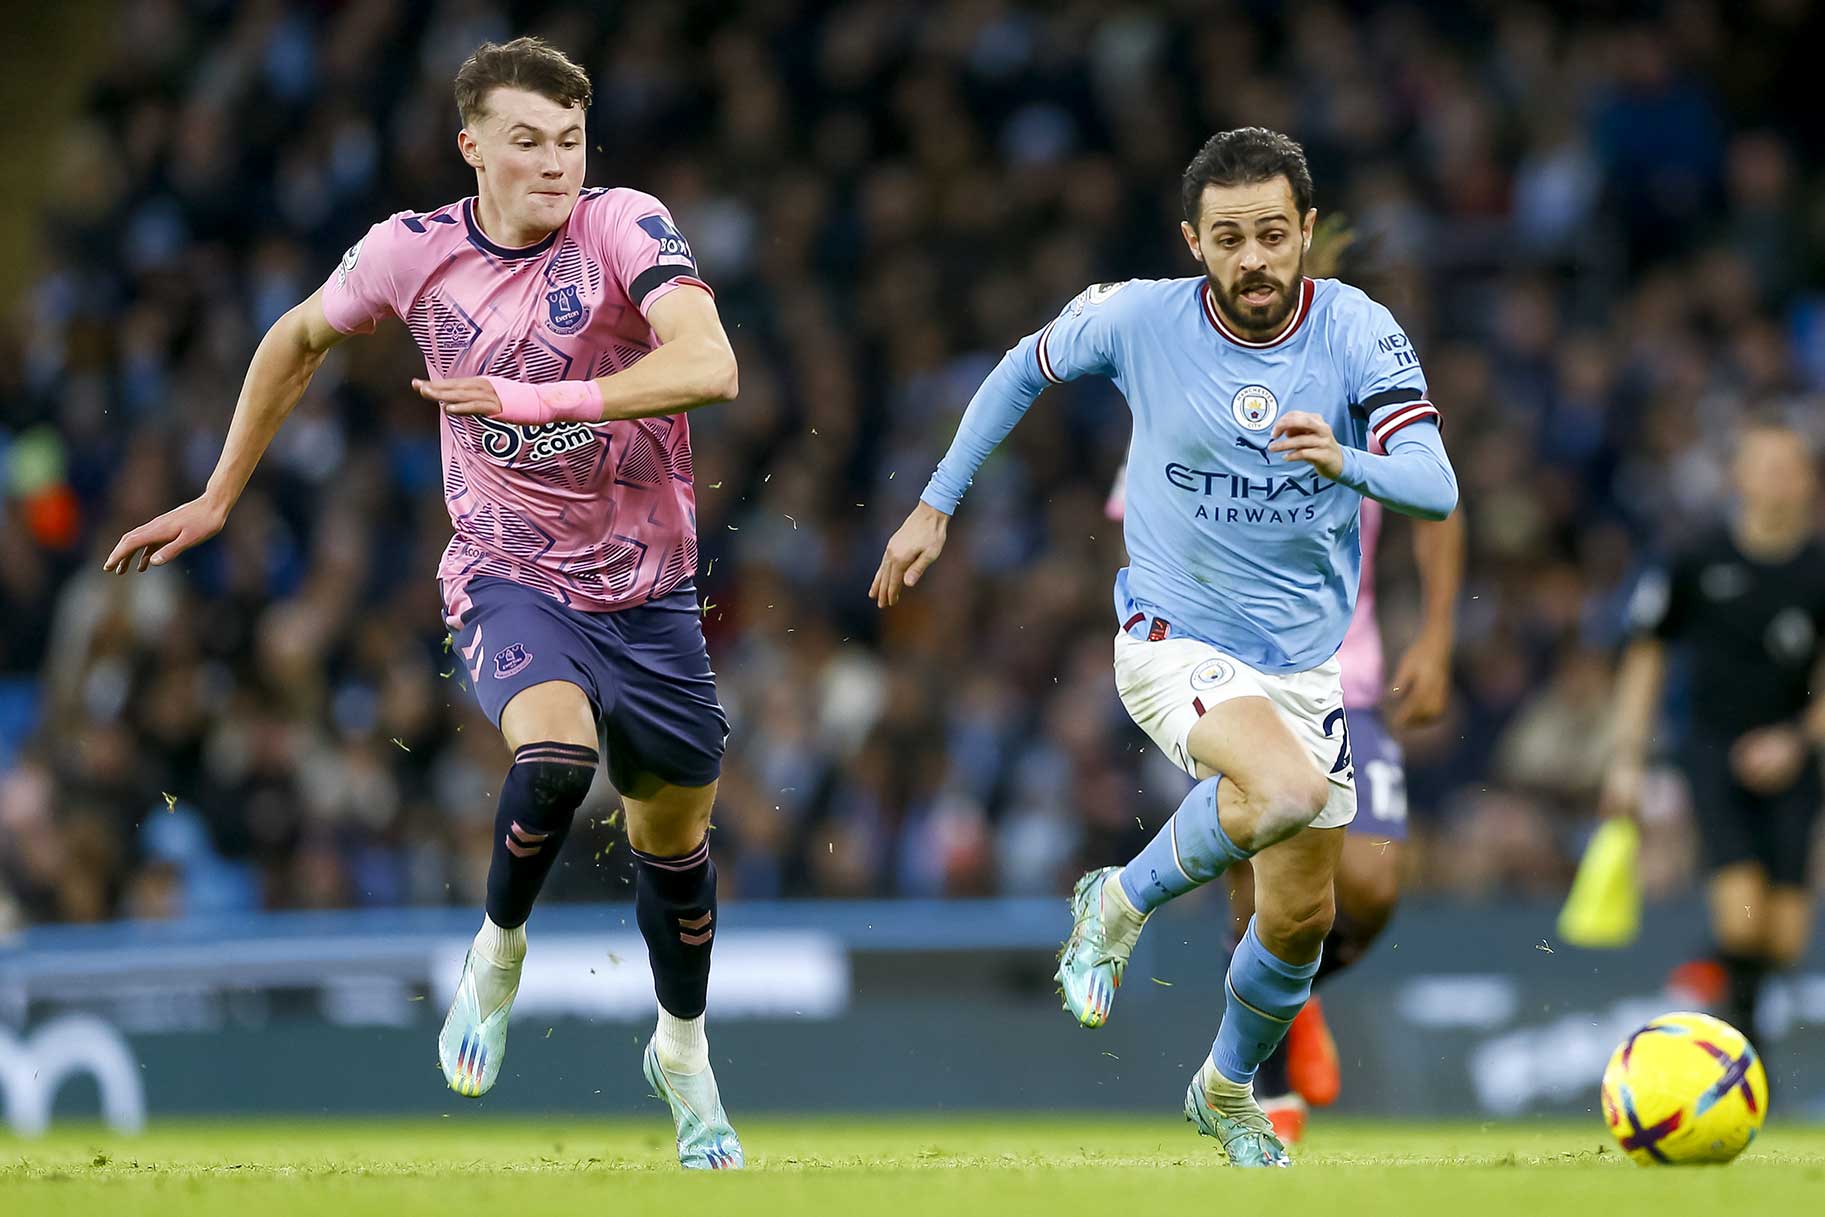 Soccer players Nathan Patterson and Bernardo Silva on the field during a Premier League match